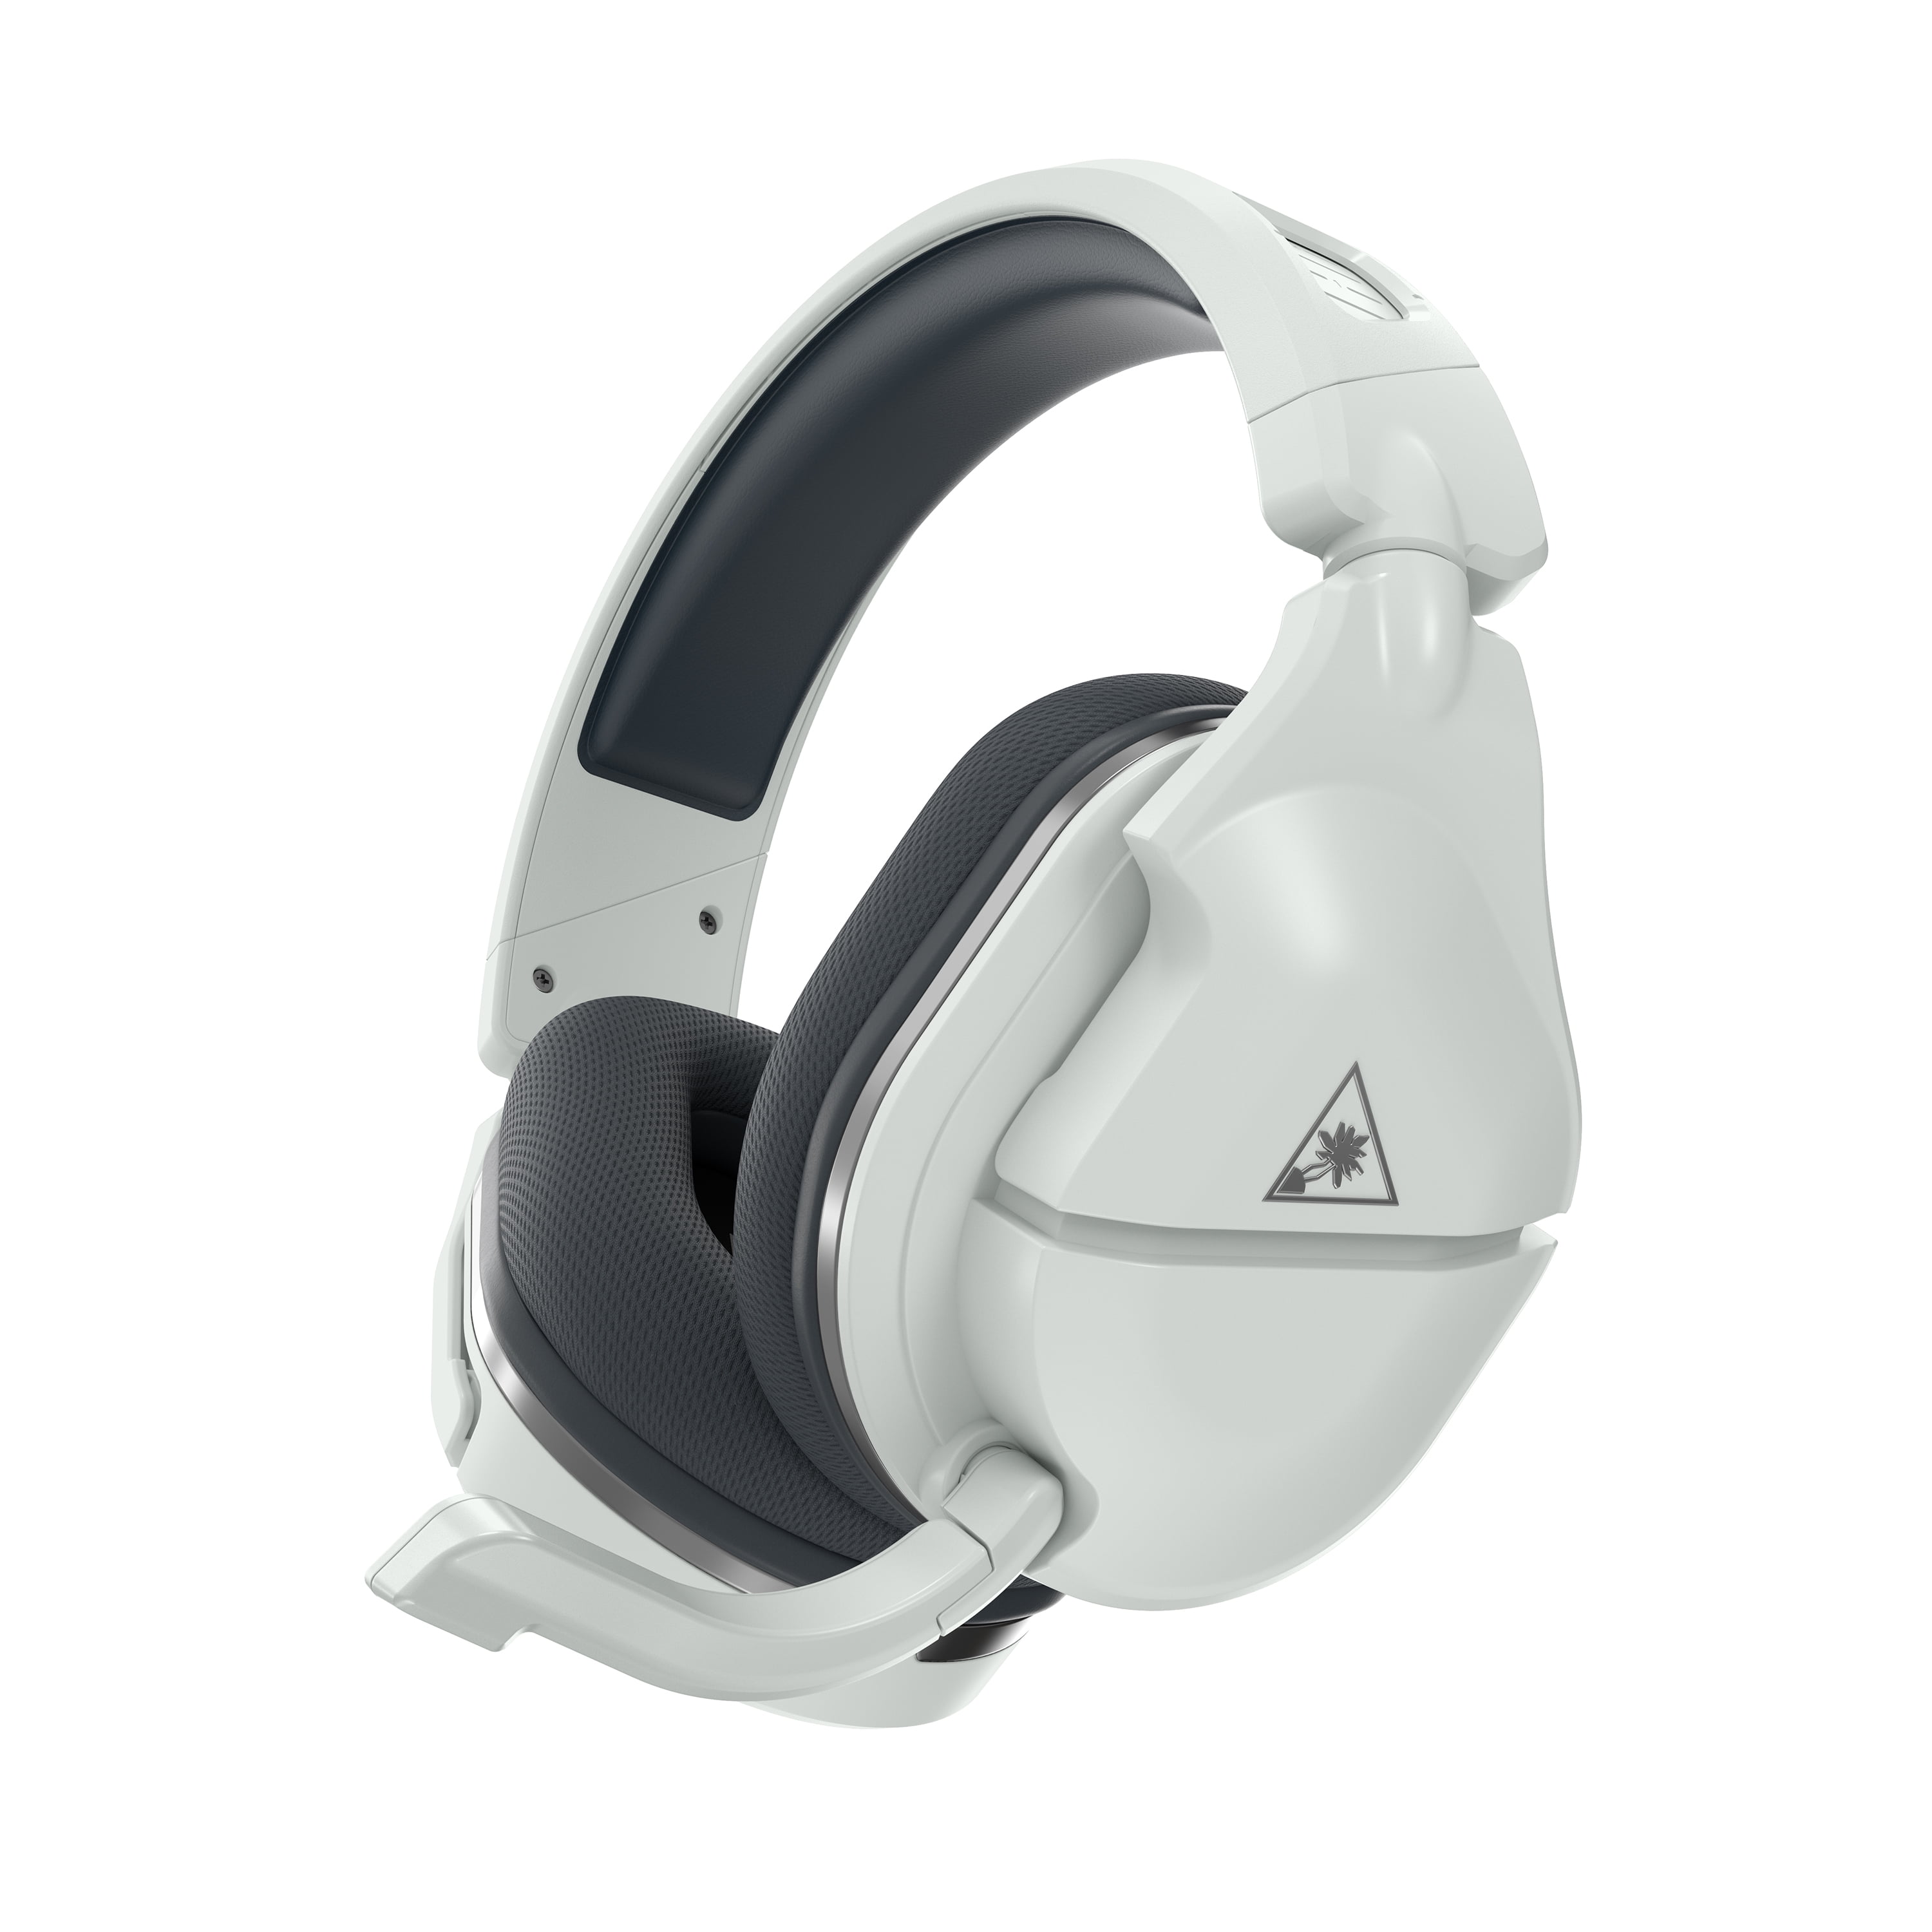 Armstrong empleo Cuerpo Turtle Beach Stealth 600 Gen 2 Wireless Gaming Headset for PS5, PS4, PS4  Pro, PlayStation, & Nintendo Switch with 50mm Speakers, 15-Hour Battery  life, Flip-to-Mute Mic, and Spatial Audio - White -